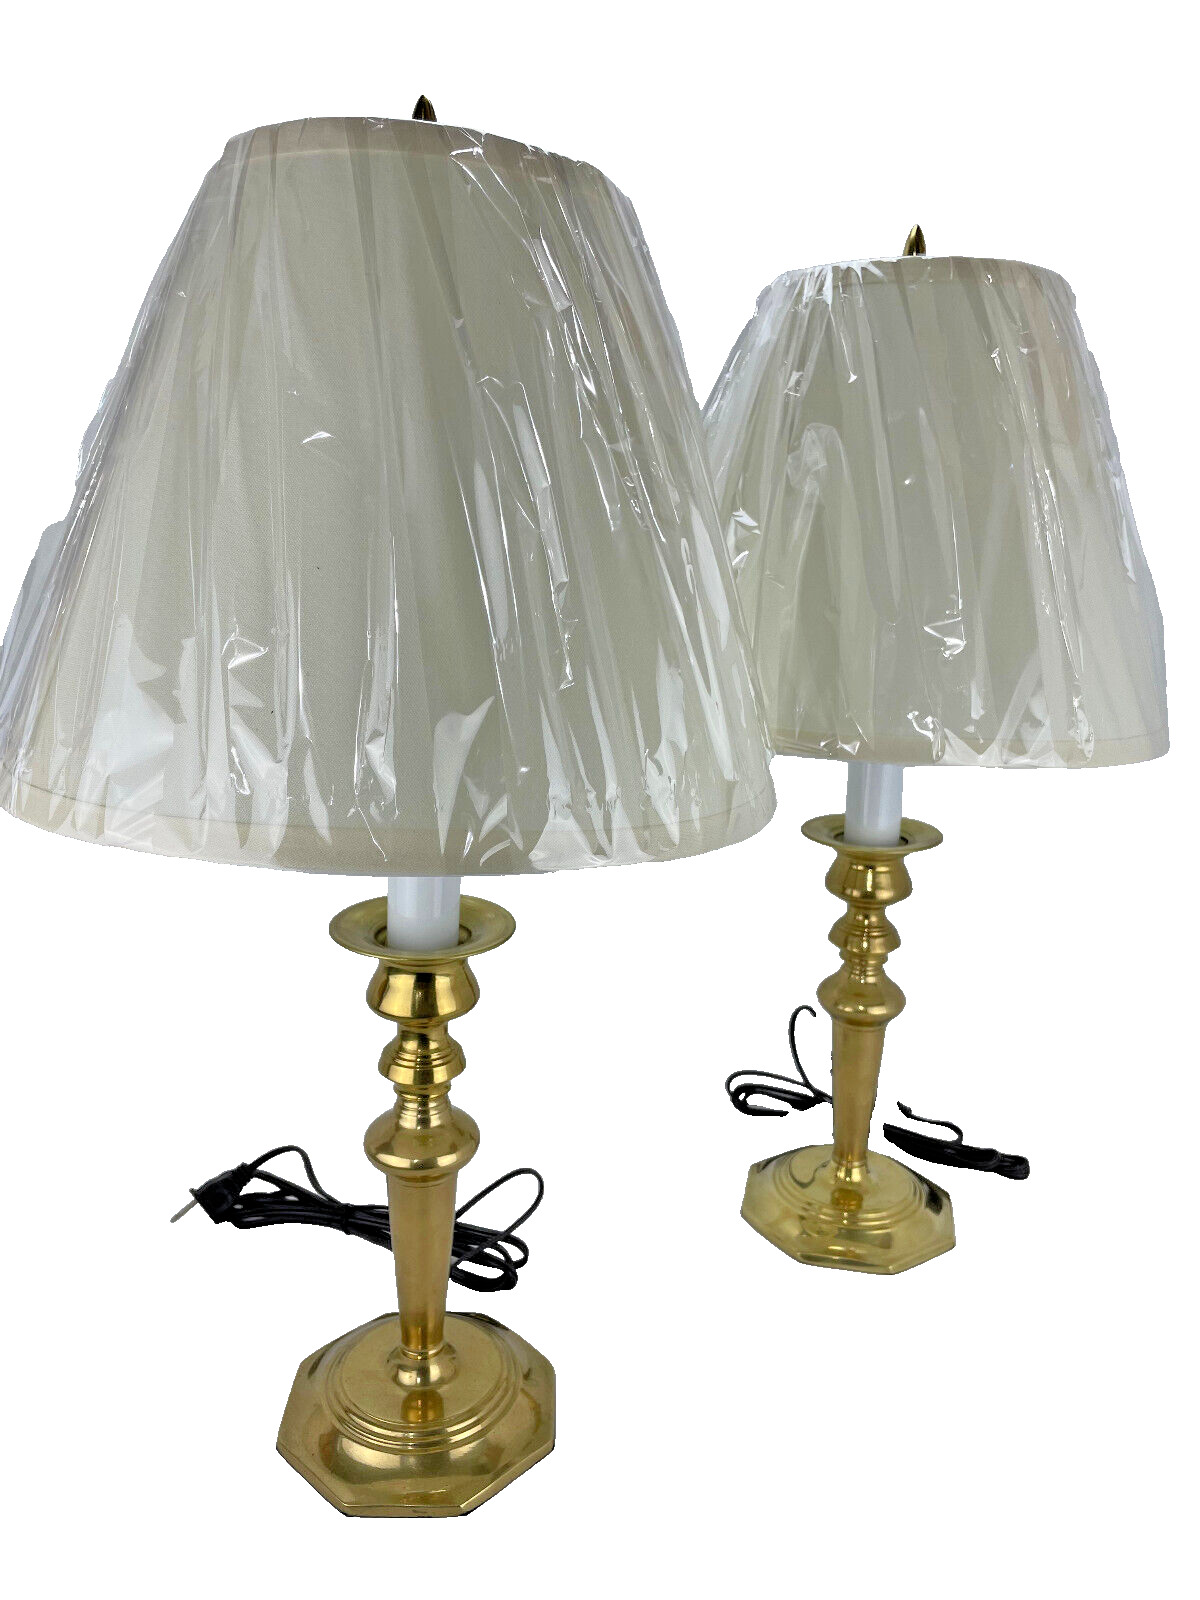 Two Vintage Solid Brass Candlestick Conversion Table Lamps New Fine Linen Shades